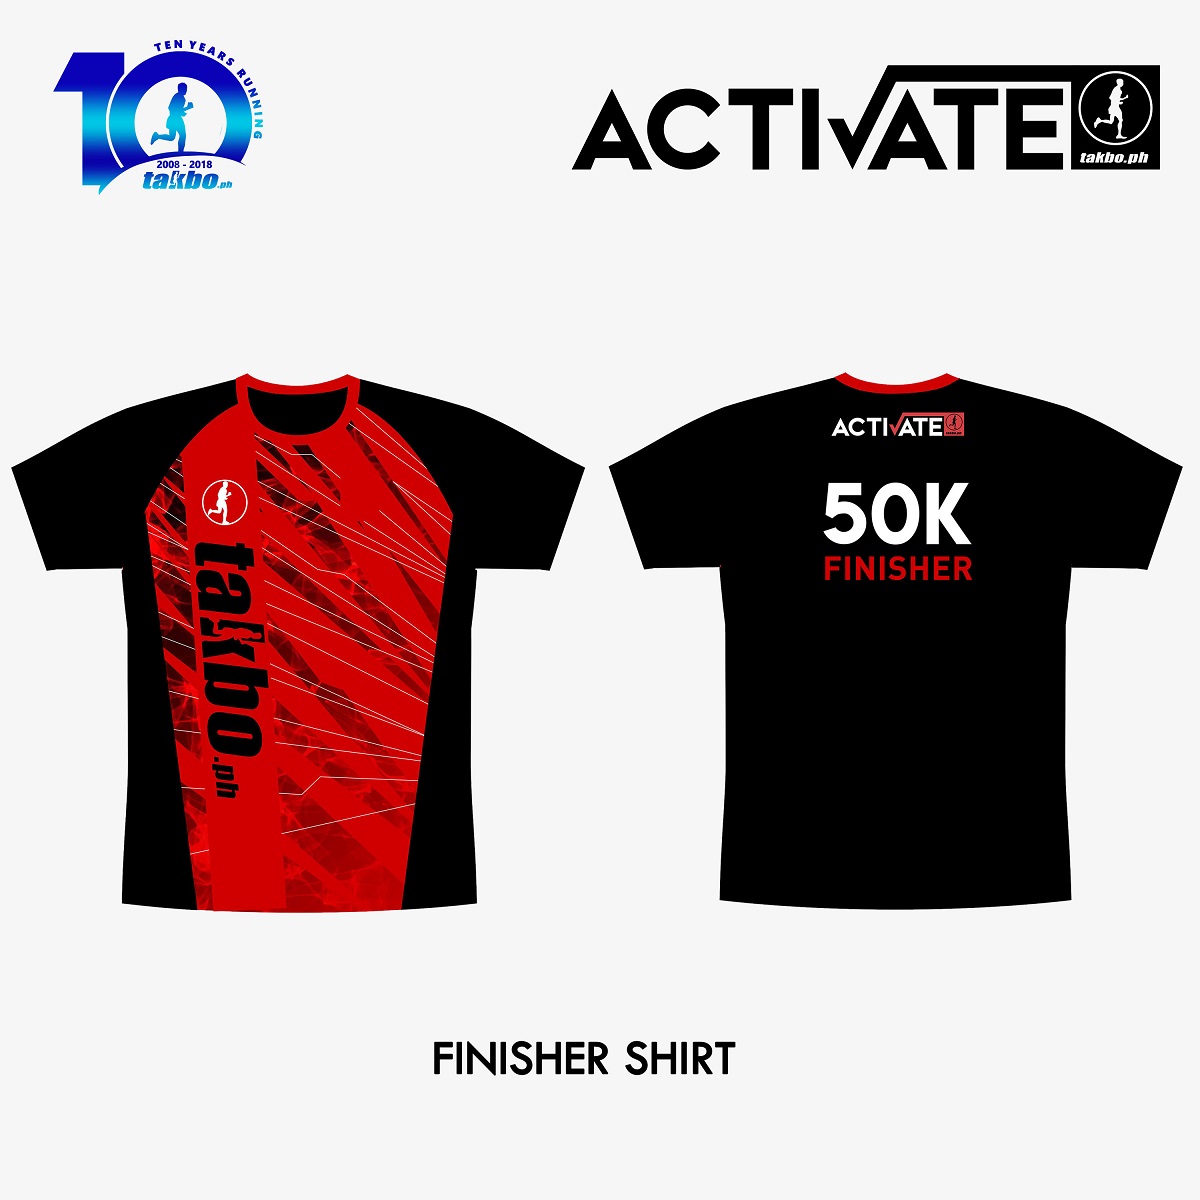 Activate 2018 Finisher Shirt R2